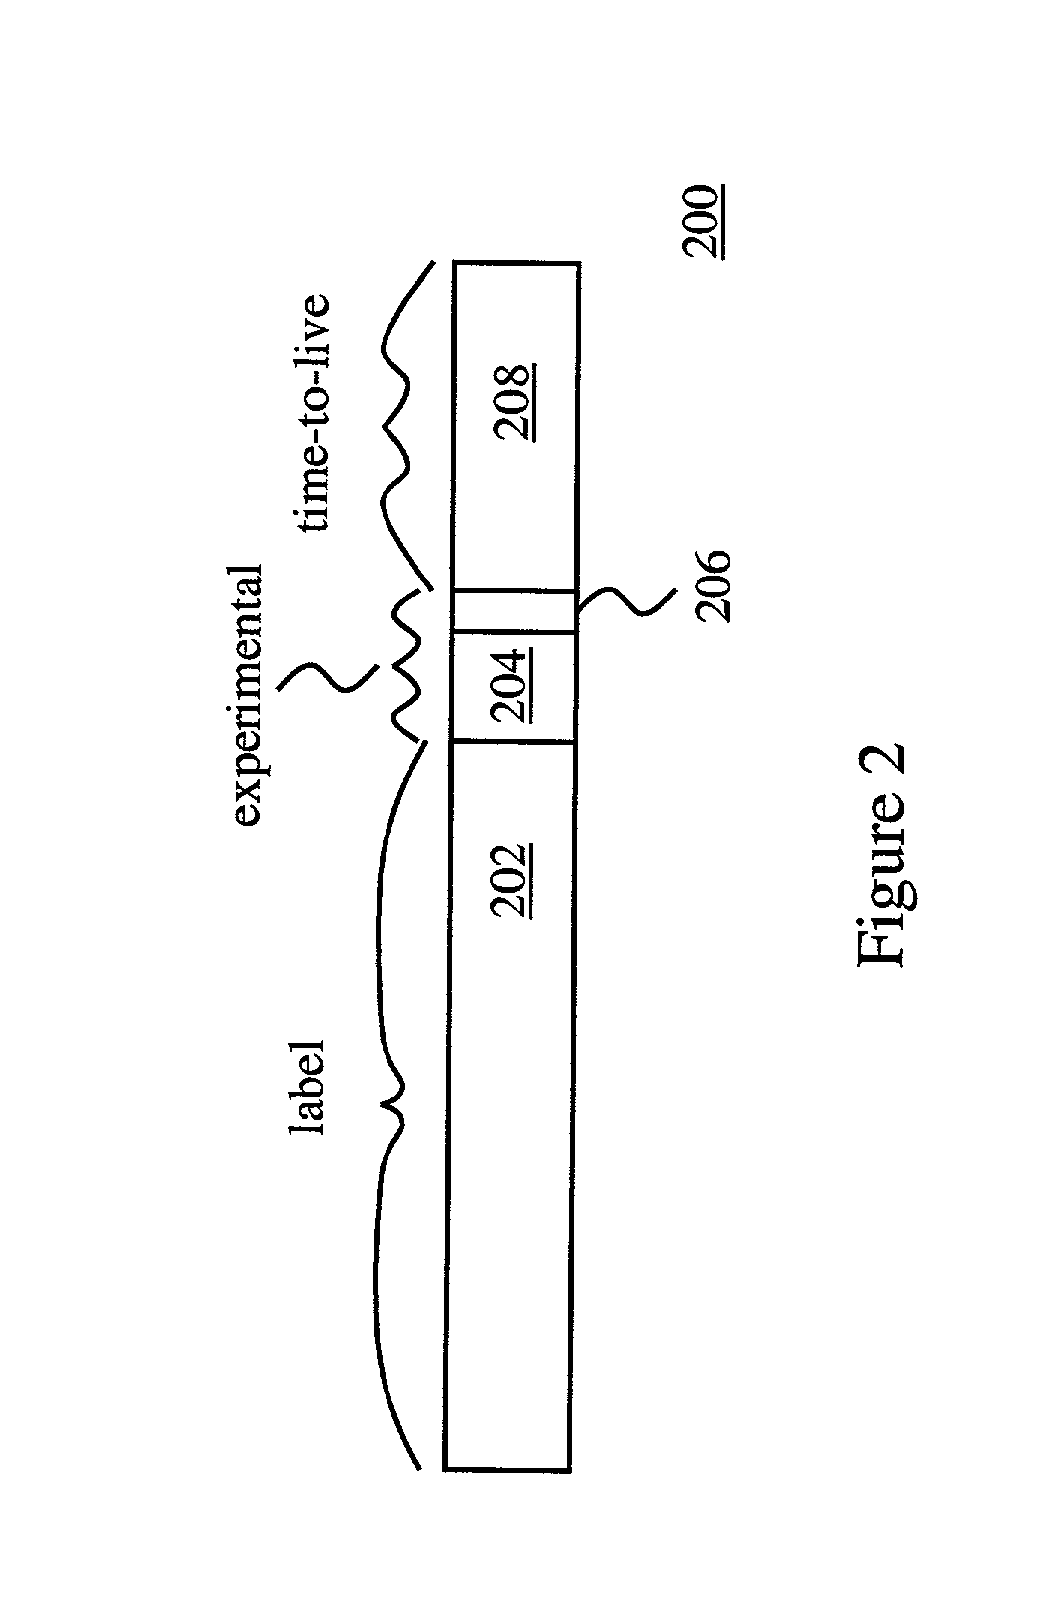 Packet transmission scheduling in a data communication network